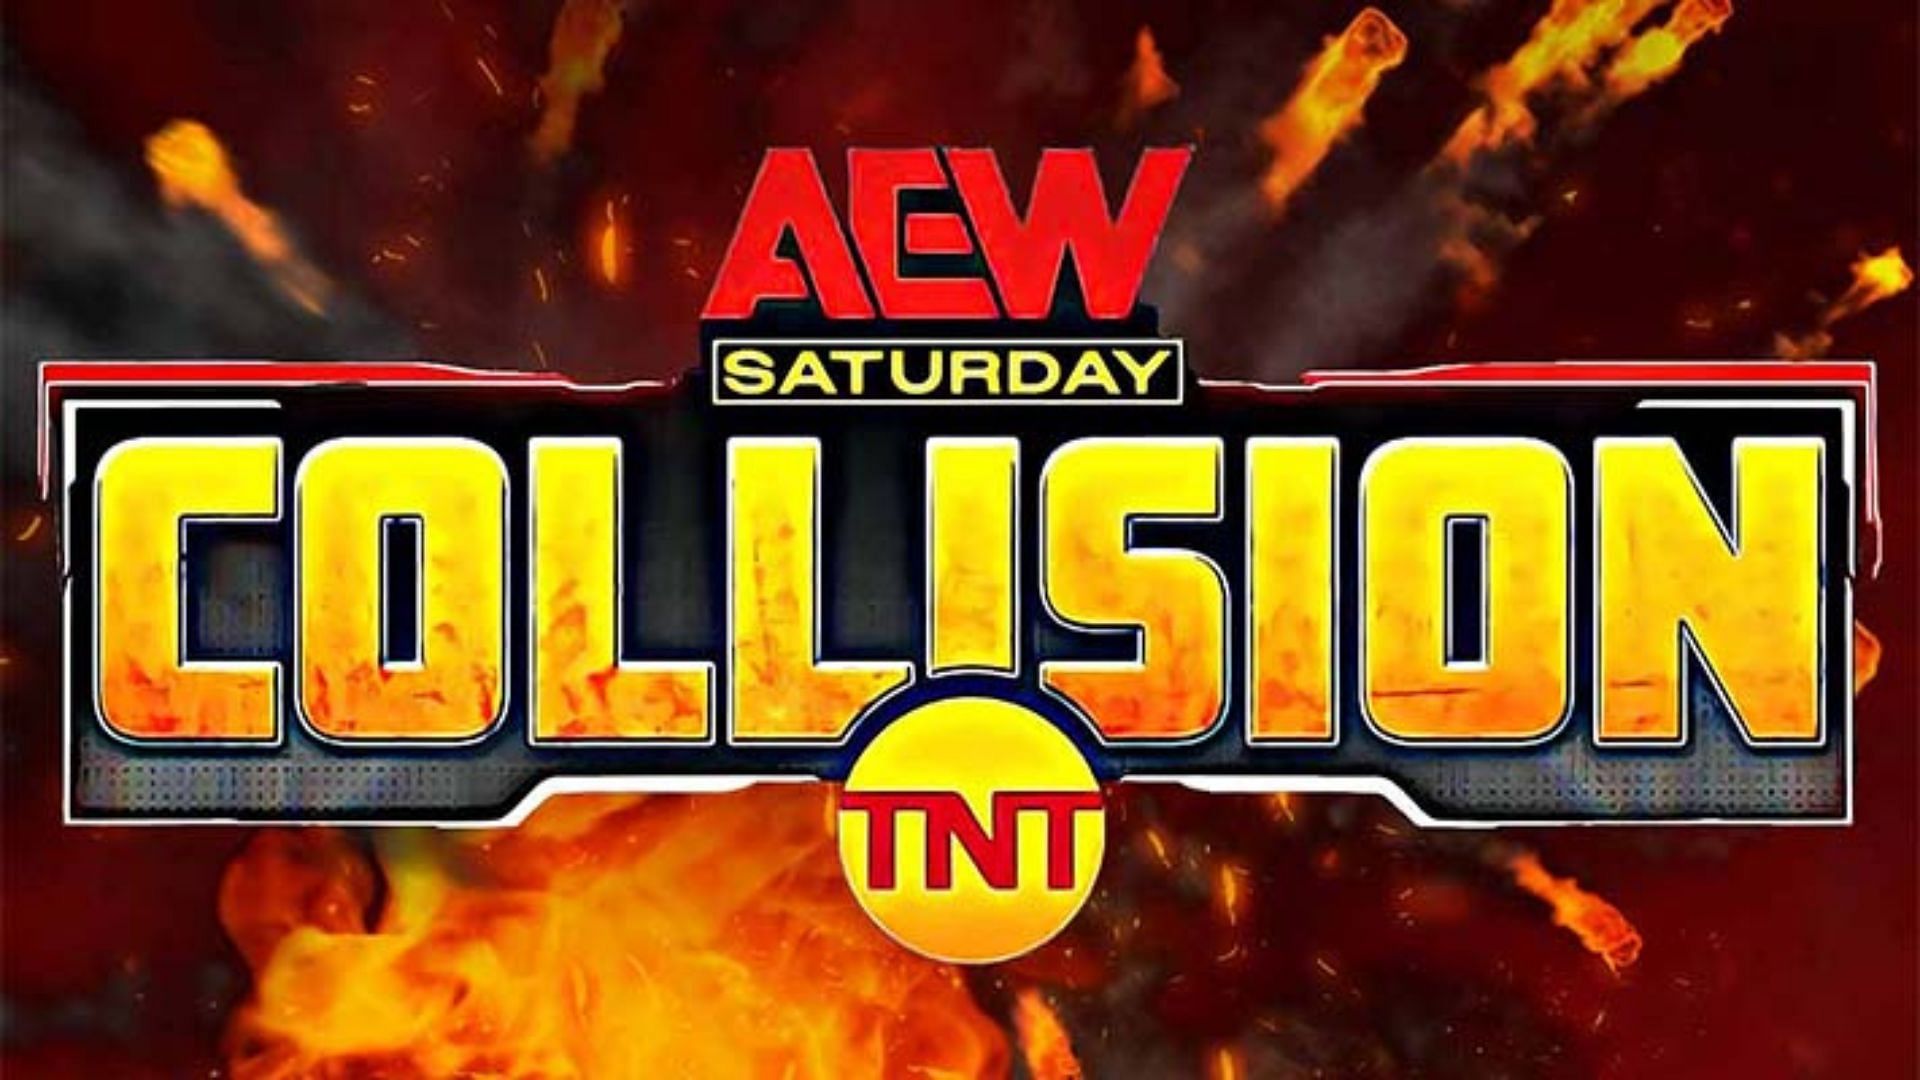 AEW Collision had a stacked card this week!